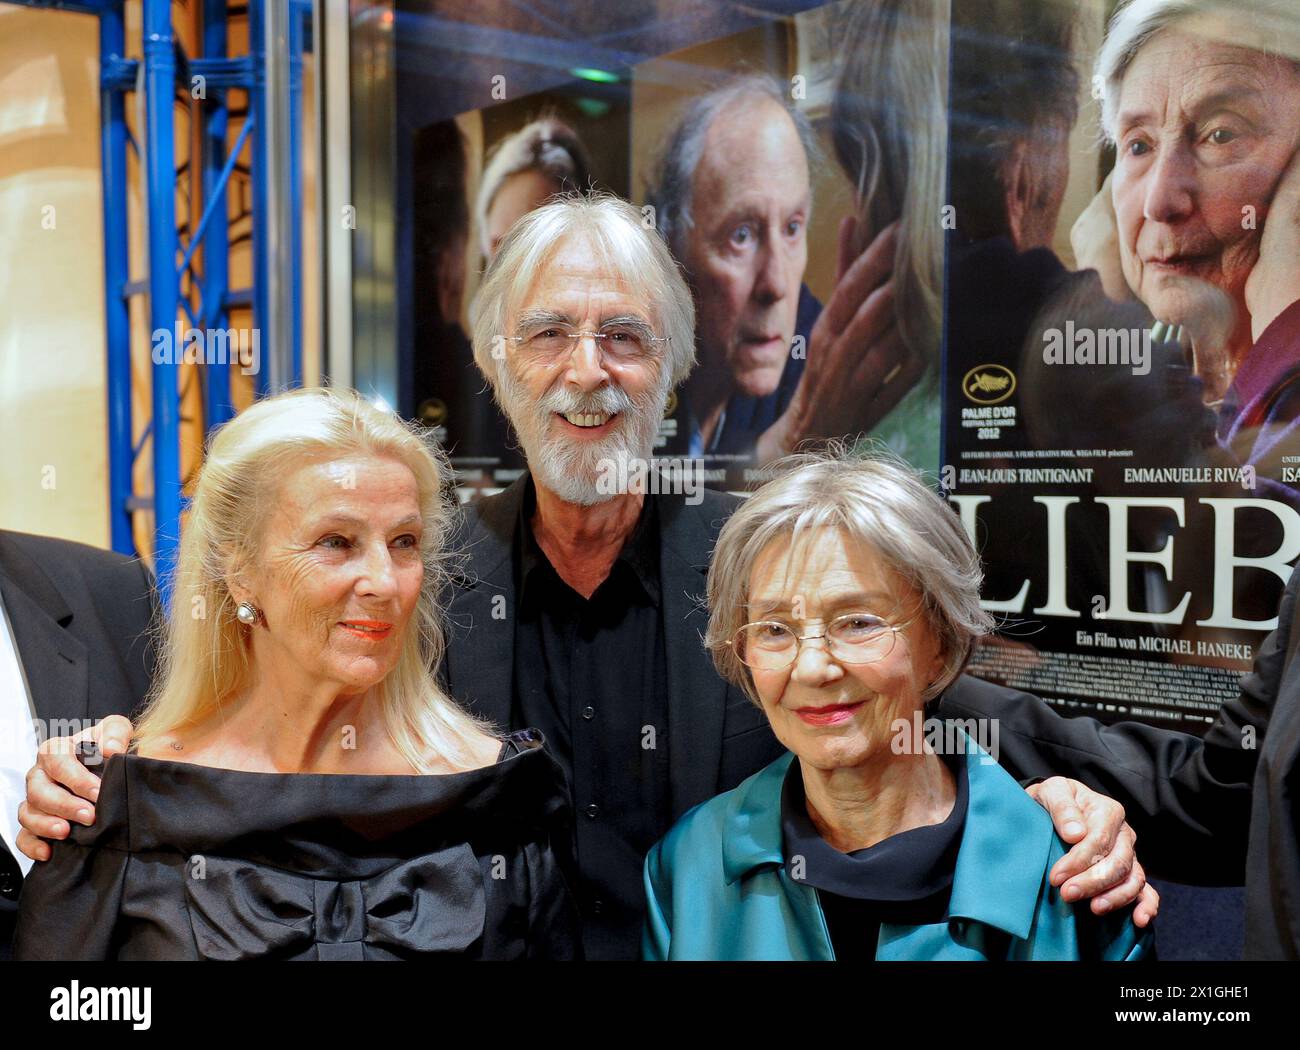 Vienna - Premiere of 'Liebe' (Amour) by Michael Haneke at Gartenbau cinema (Gartenbaukino) in Vienna on 17th September 2012. PICTURE:  Actress Emmannuelle Riva (r), director Michael Haneke (m) and his wife Susi Haneke - 20120917 PD3537 - Rechteinfo: Rights Managed (RM) Stock Photo